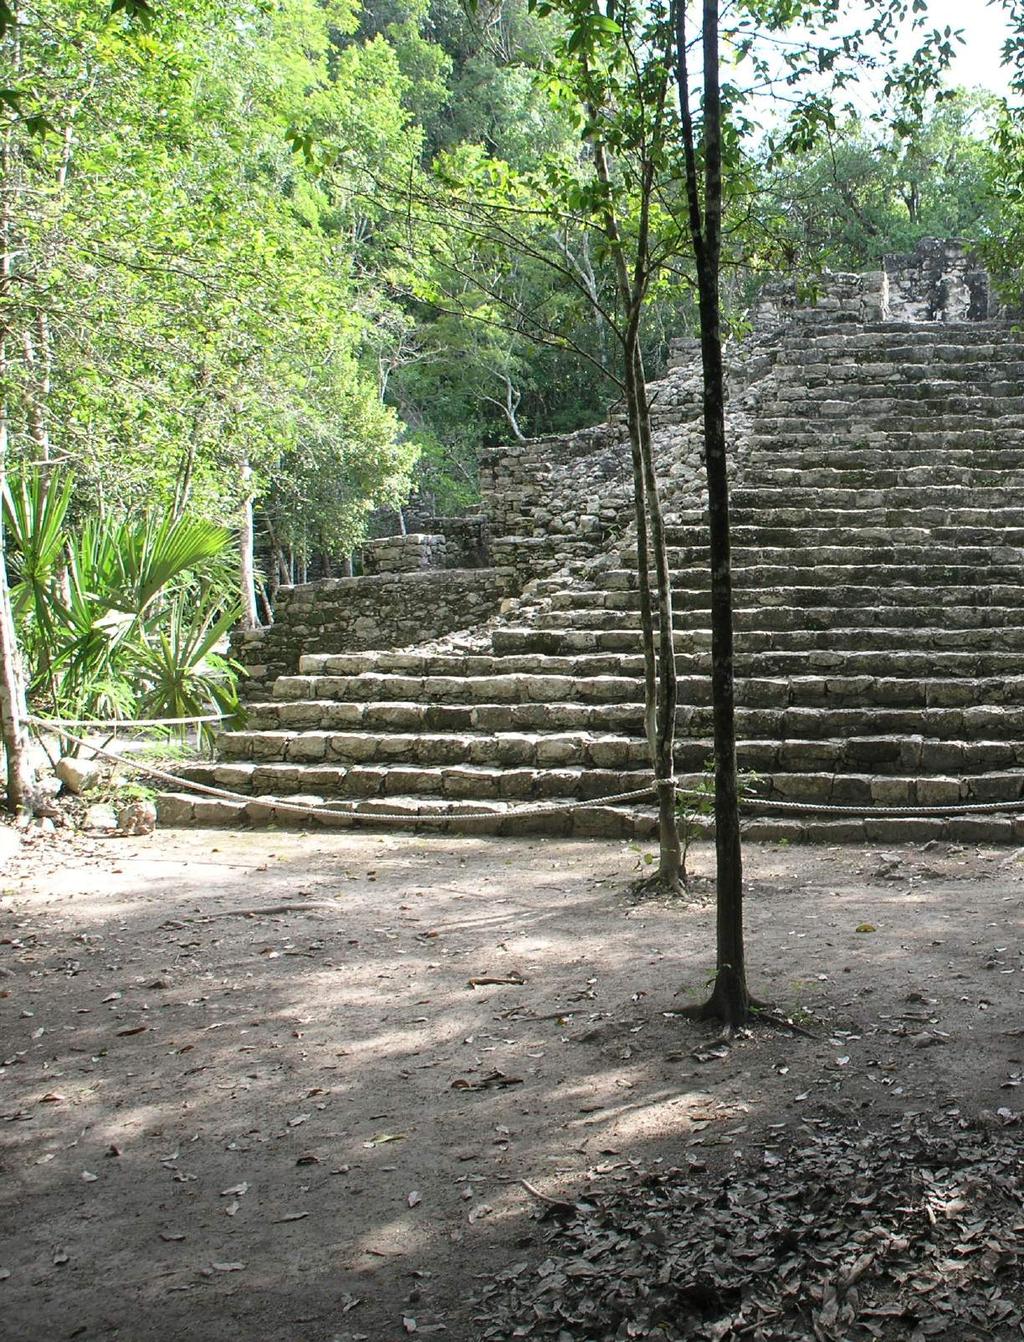 INTERESTING FACTS ABOUT COBA The main pyramid, Nohoch Mul meaning 'large hill', is 42 meters tall (138 feet), the highest in the Yucatan peninsula.